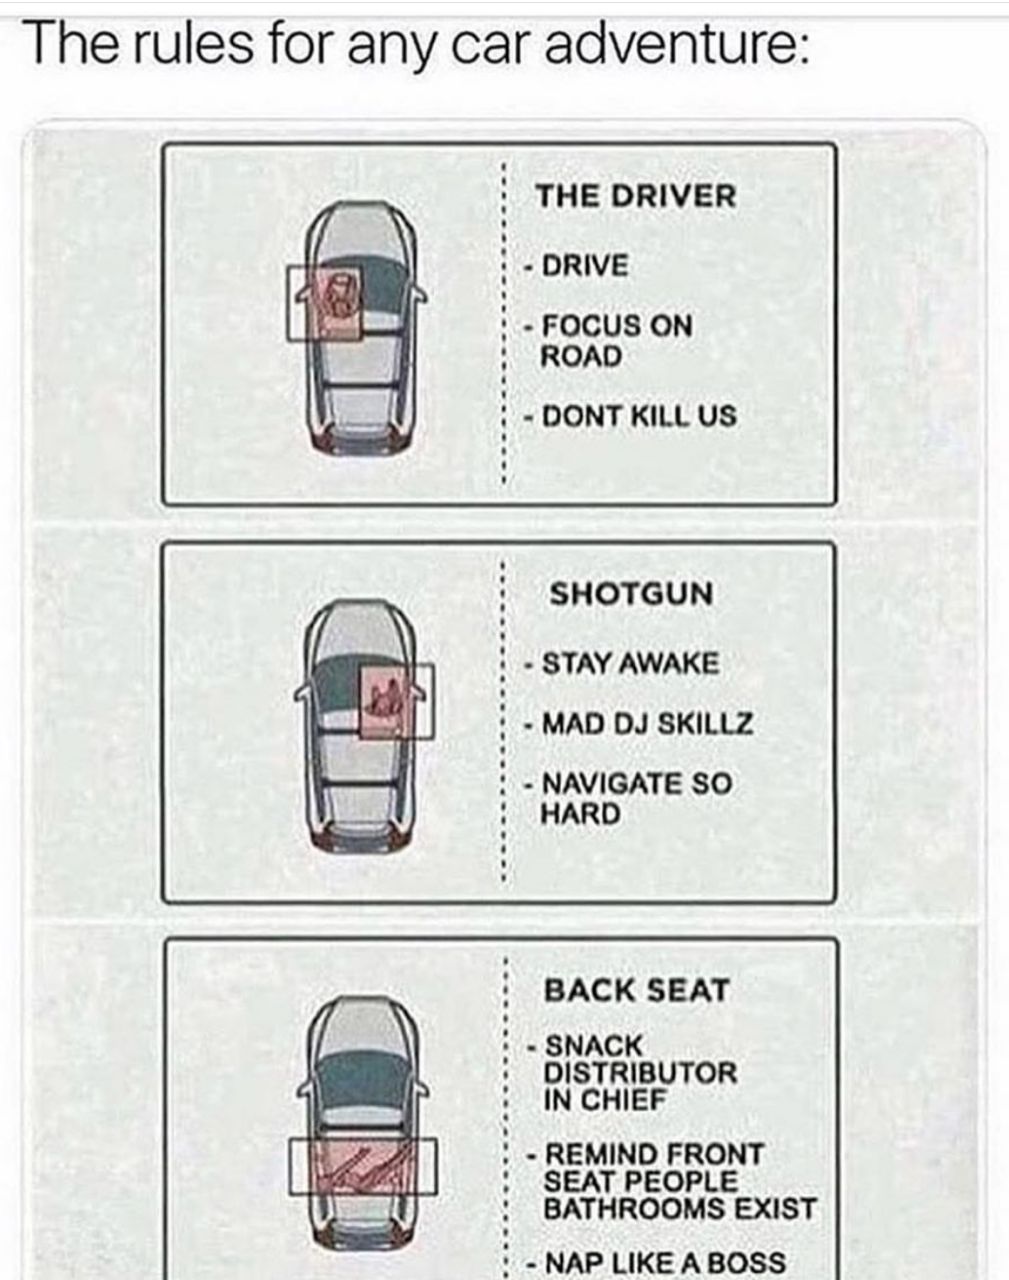 The rules for car adventure